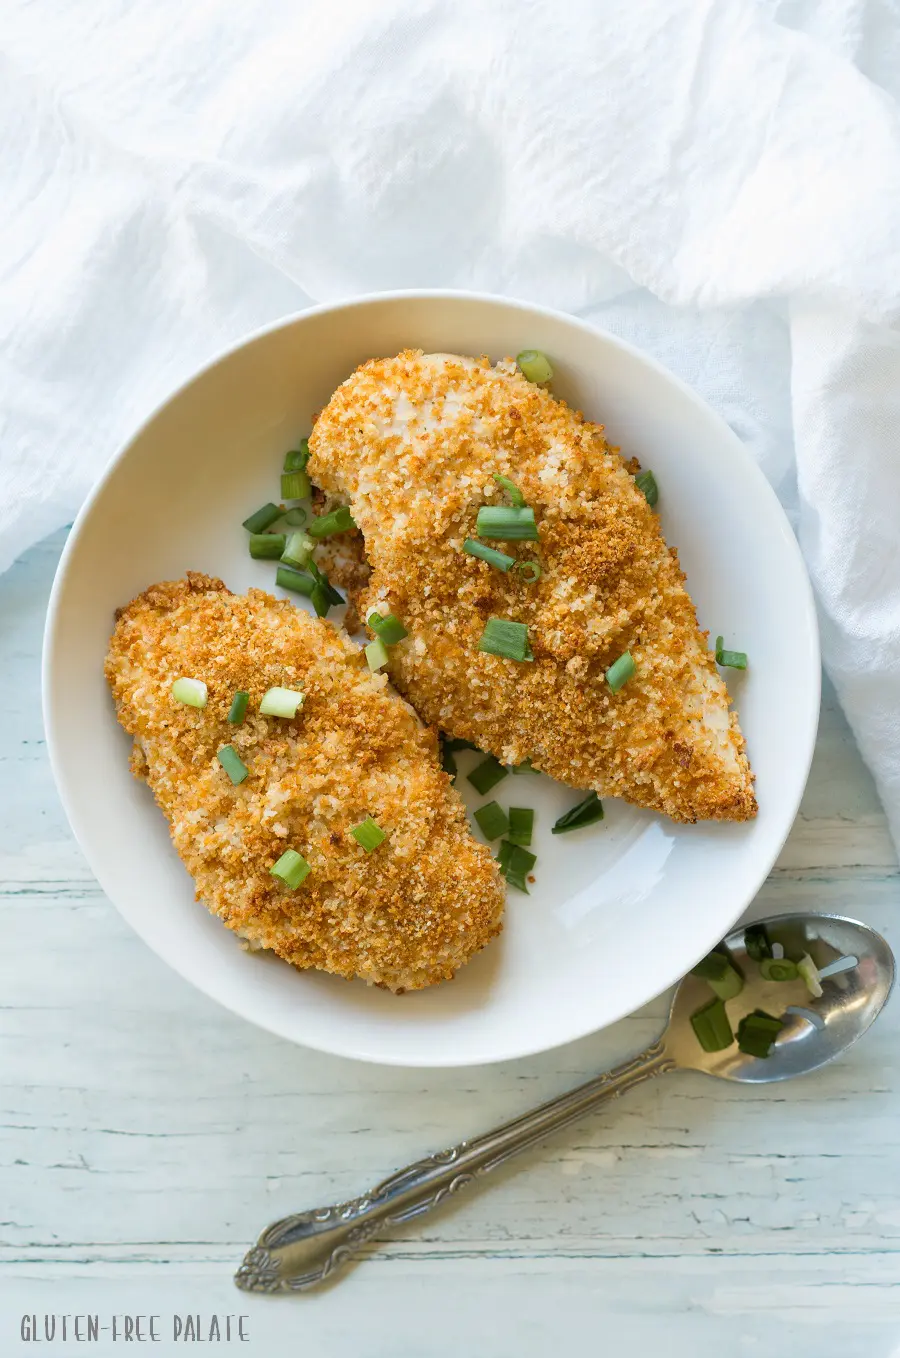 top view of two gluten-free breaded chicken breasts topped with sliced green onion on a white plate